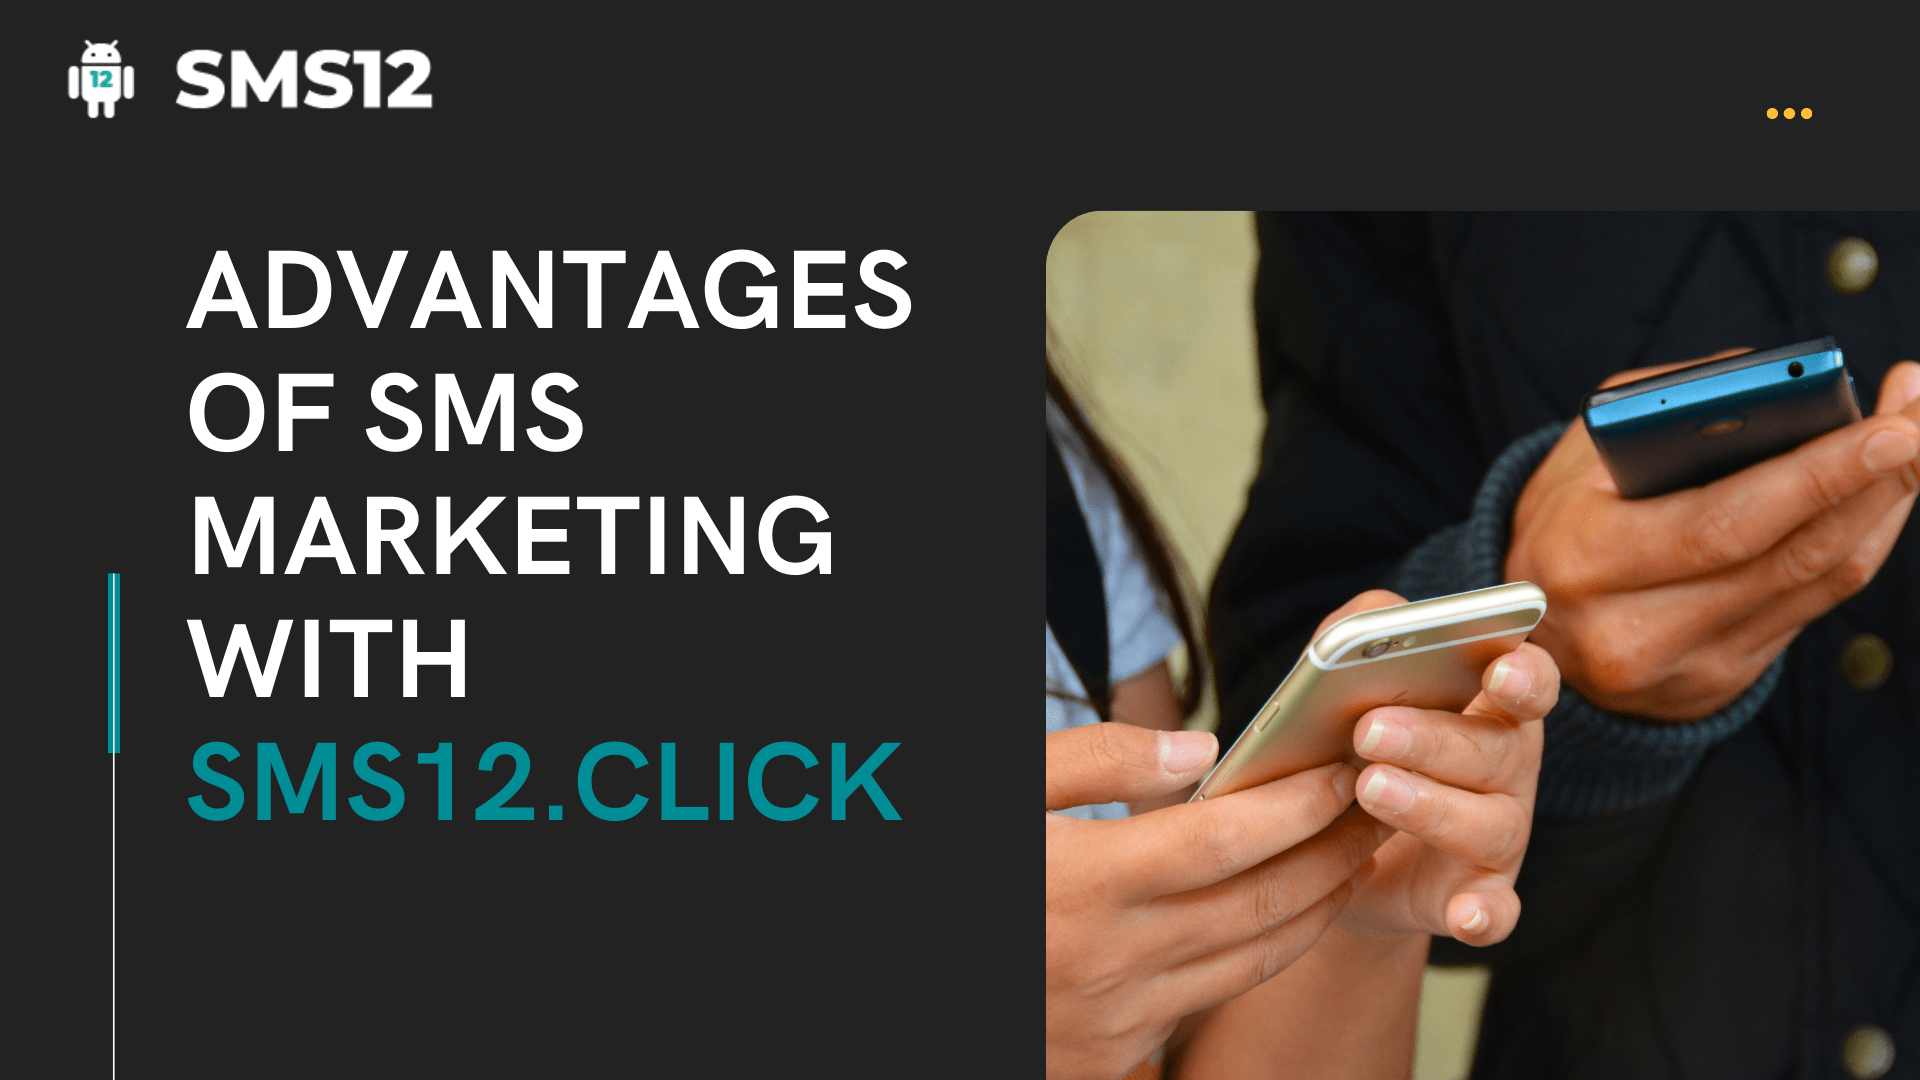 Advantages of SMS Marketing with SMS12.click